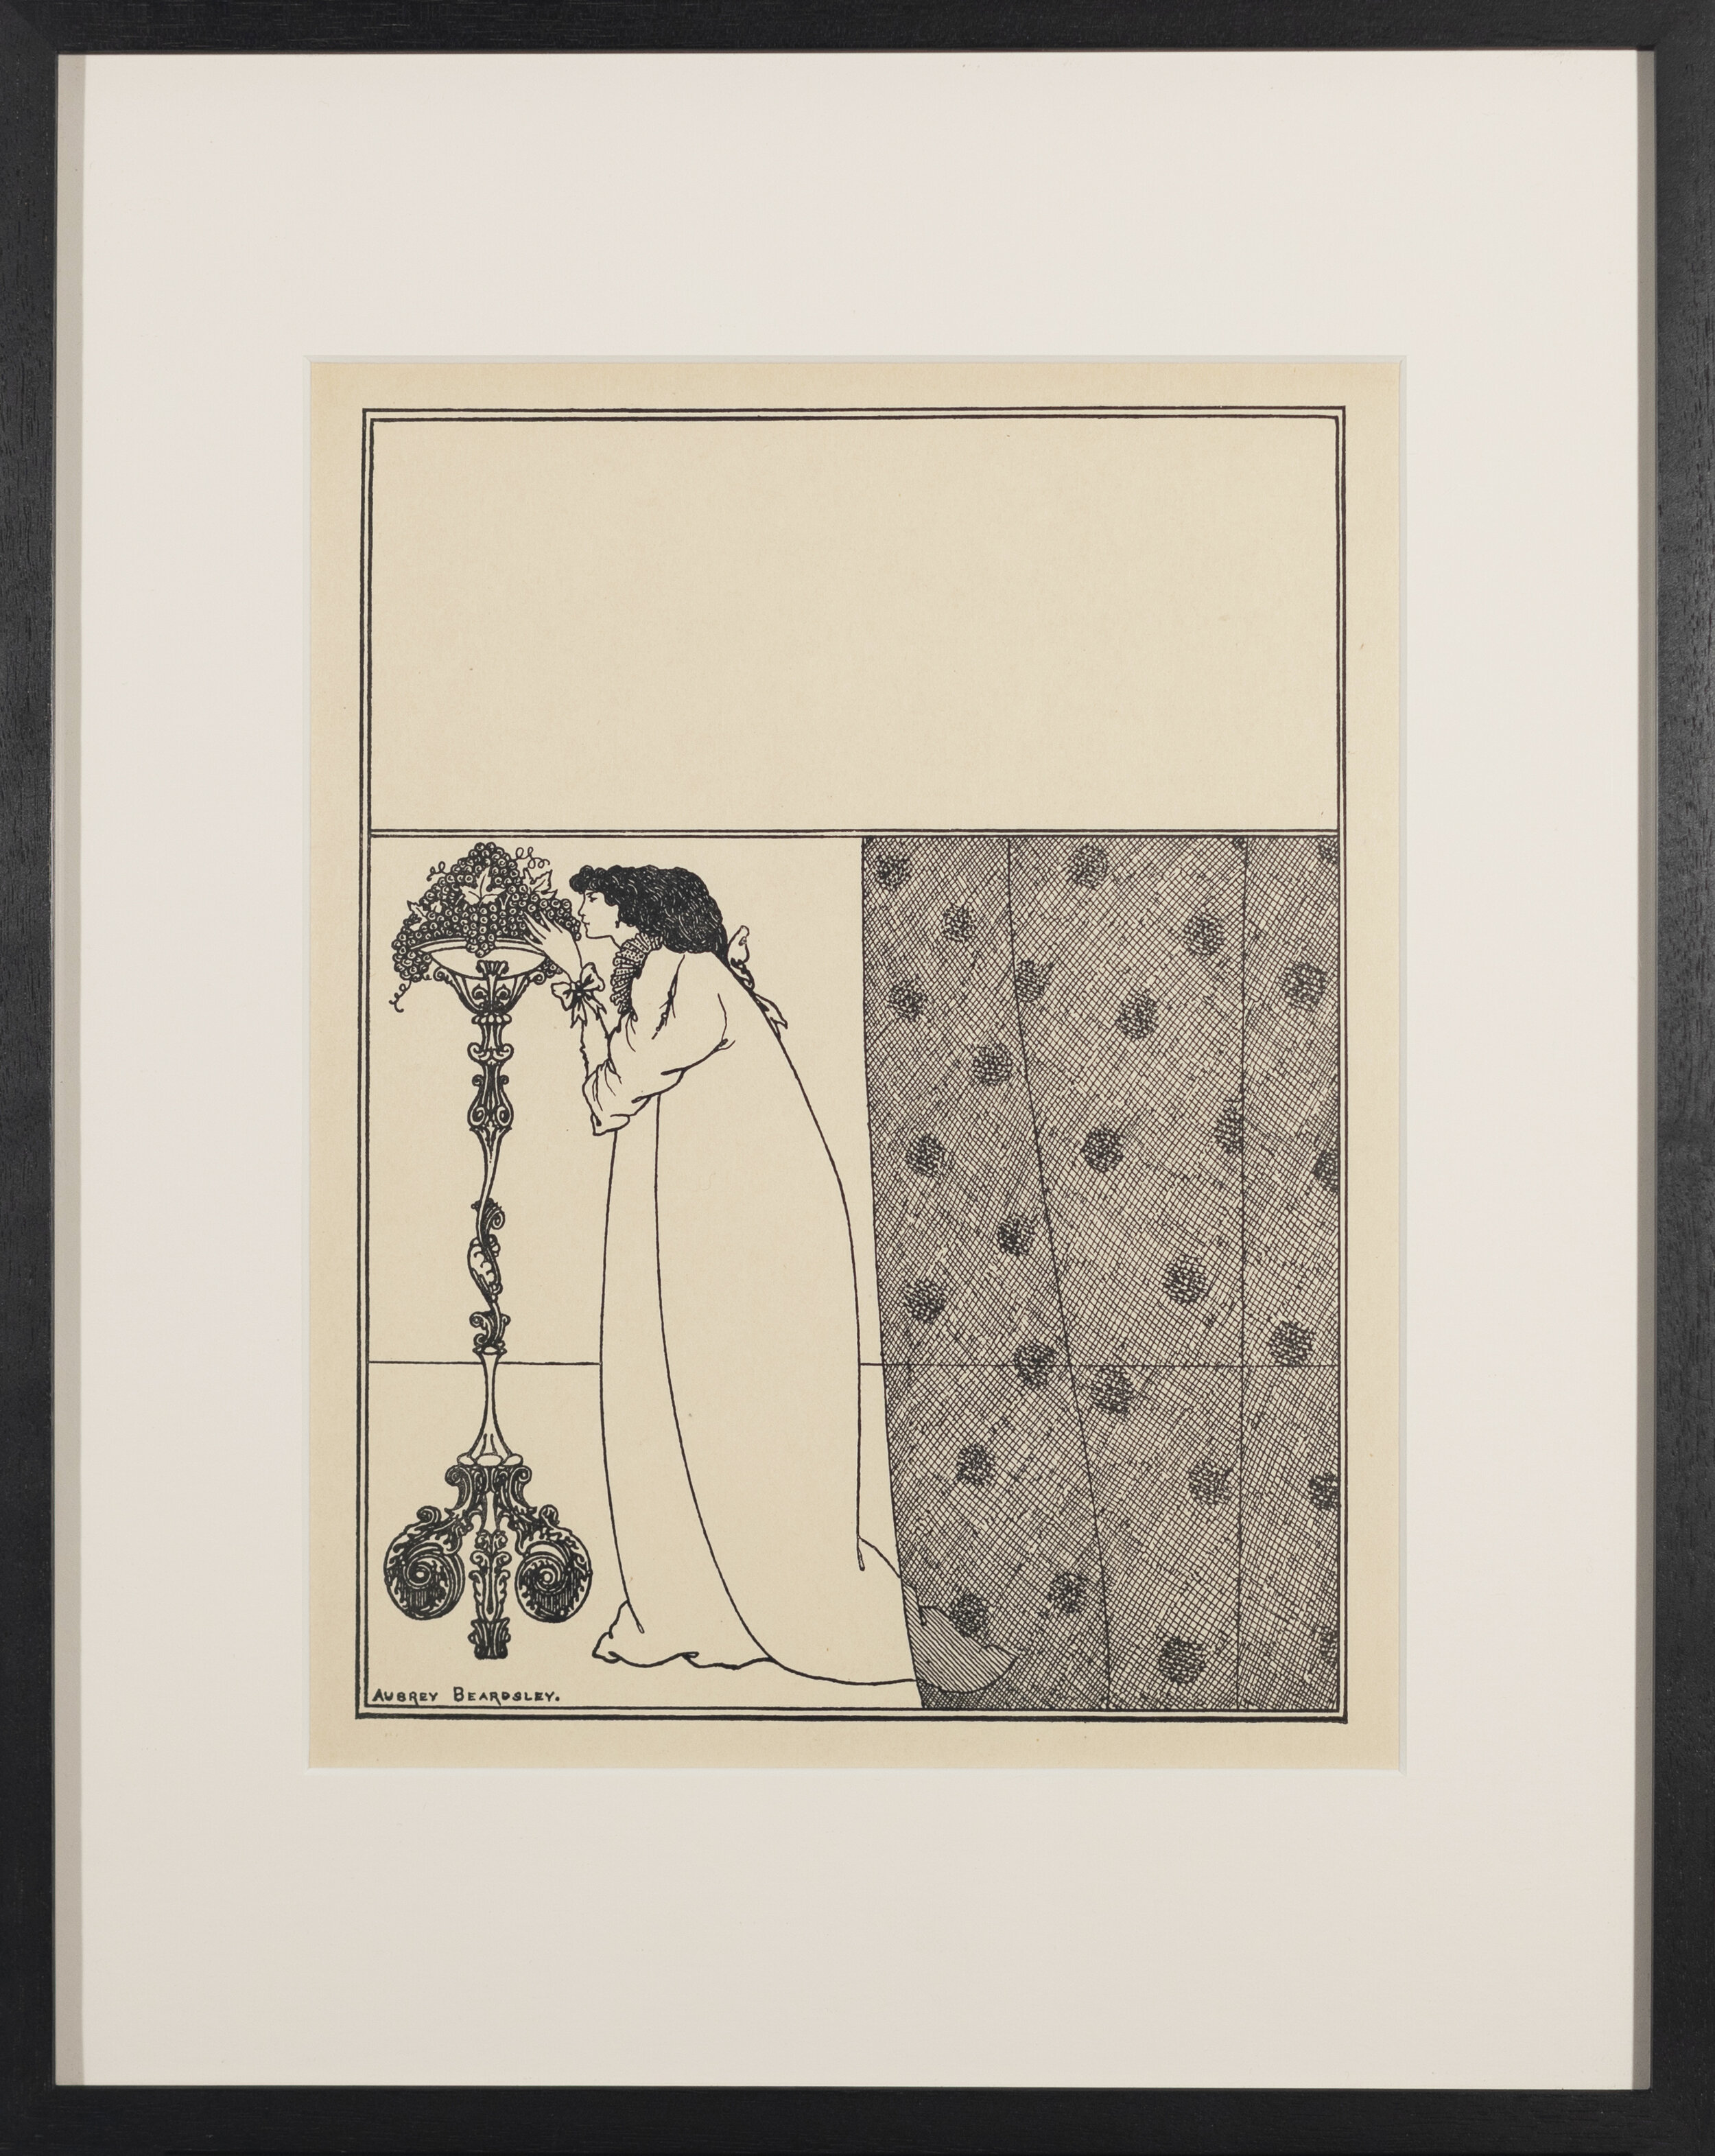  Aubrey Beardsley, Cover design for No. 4 of “The Savoy.” Printed in  A Second Book of Fifty Drawings , by Aubrey Beardsley (Leonard Smithers &amp; Co, London, 1899), ca. 1899, magazine page, 14 3/4" × 11 3/4" (framed) 